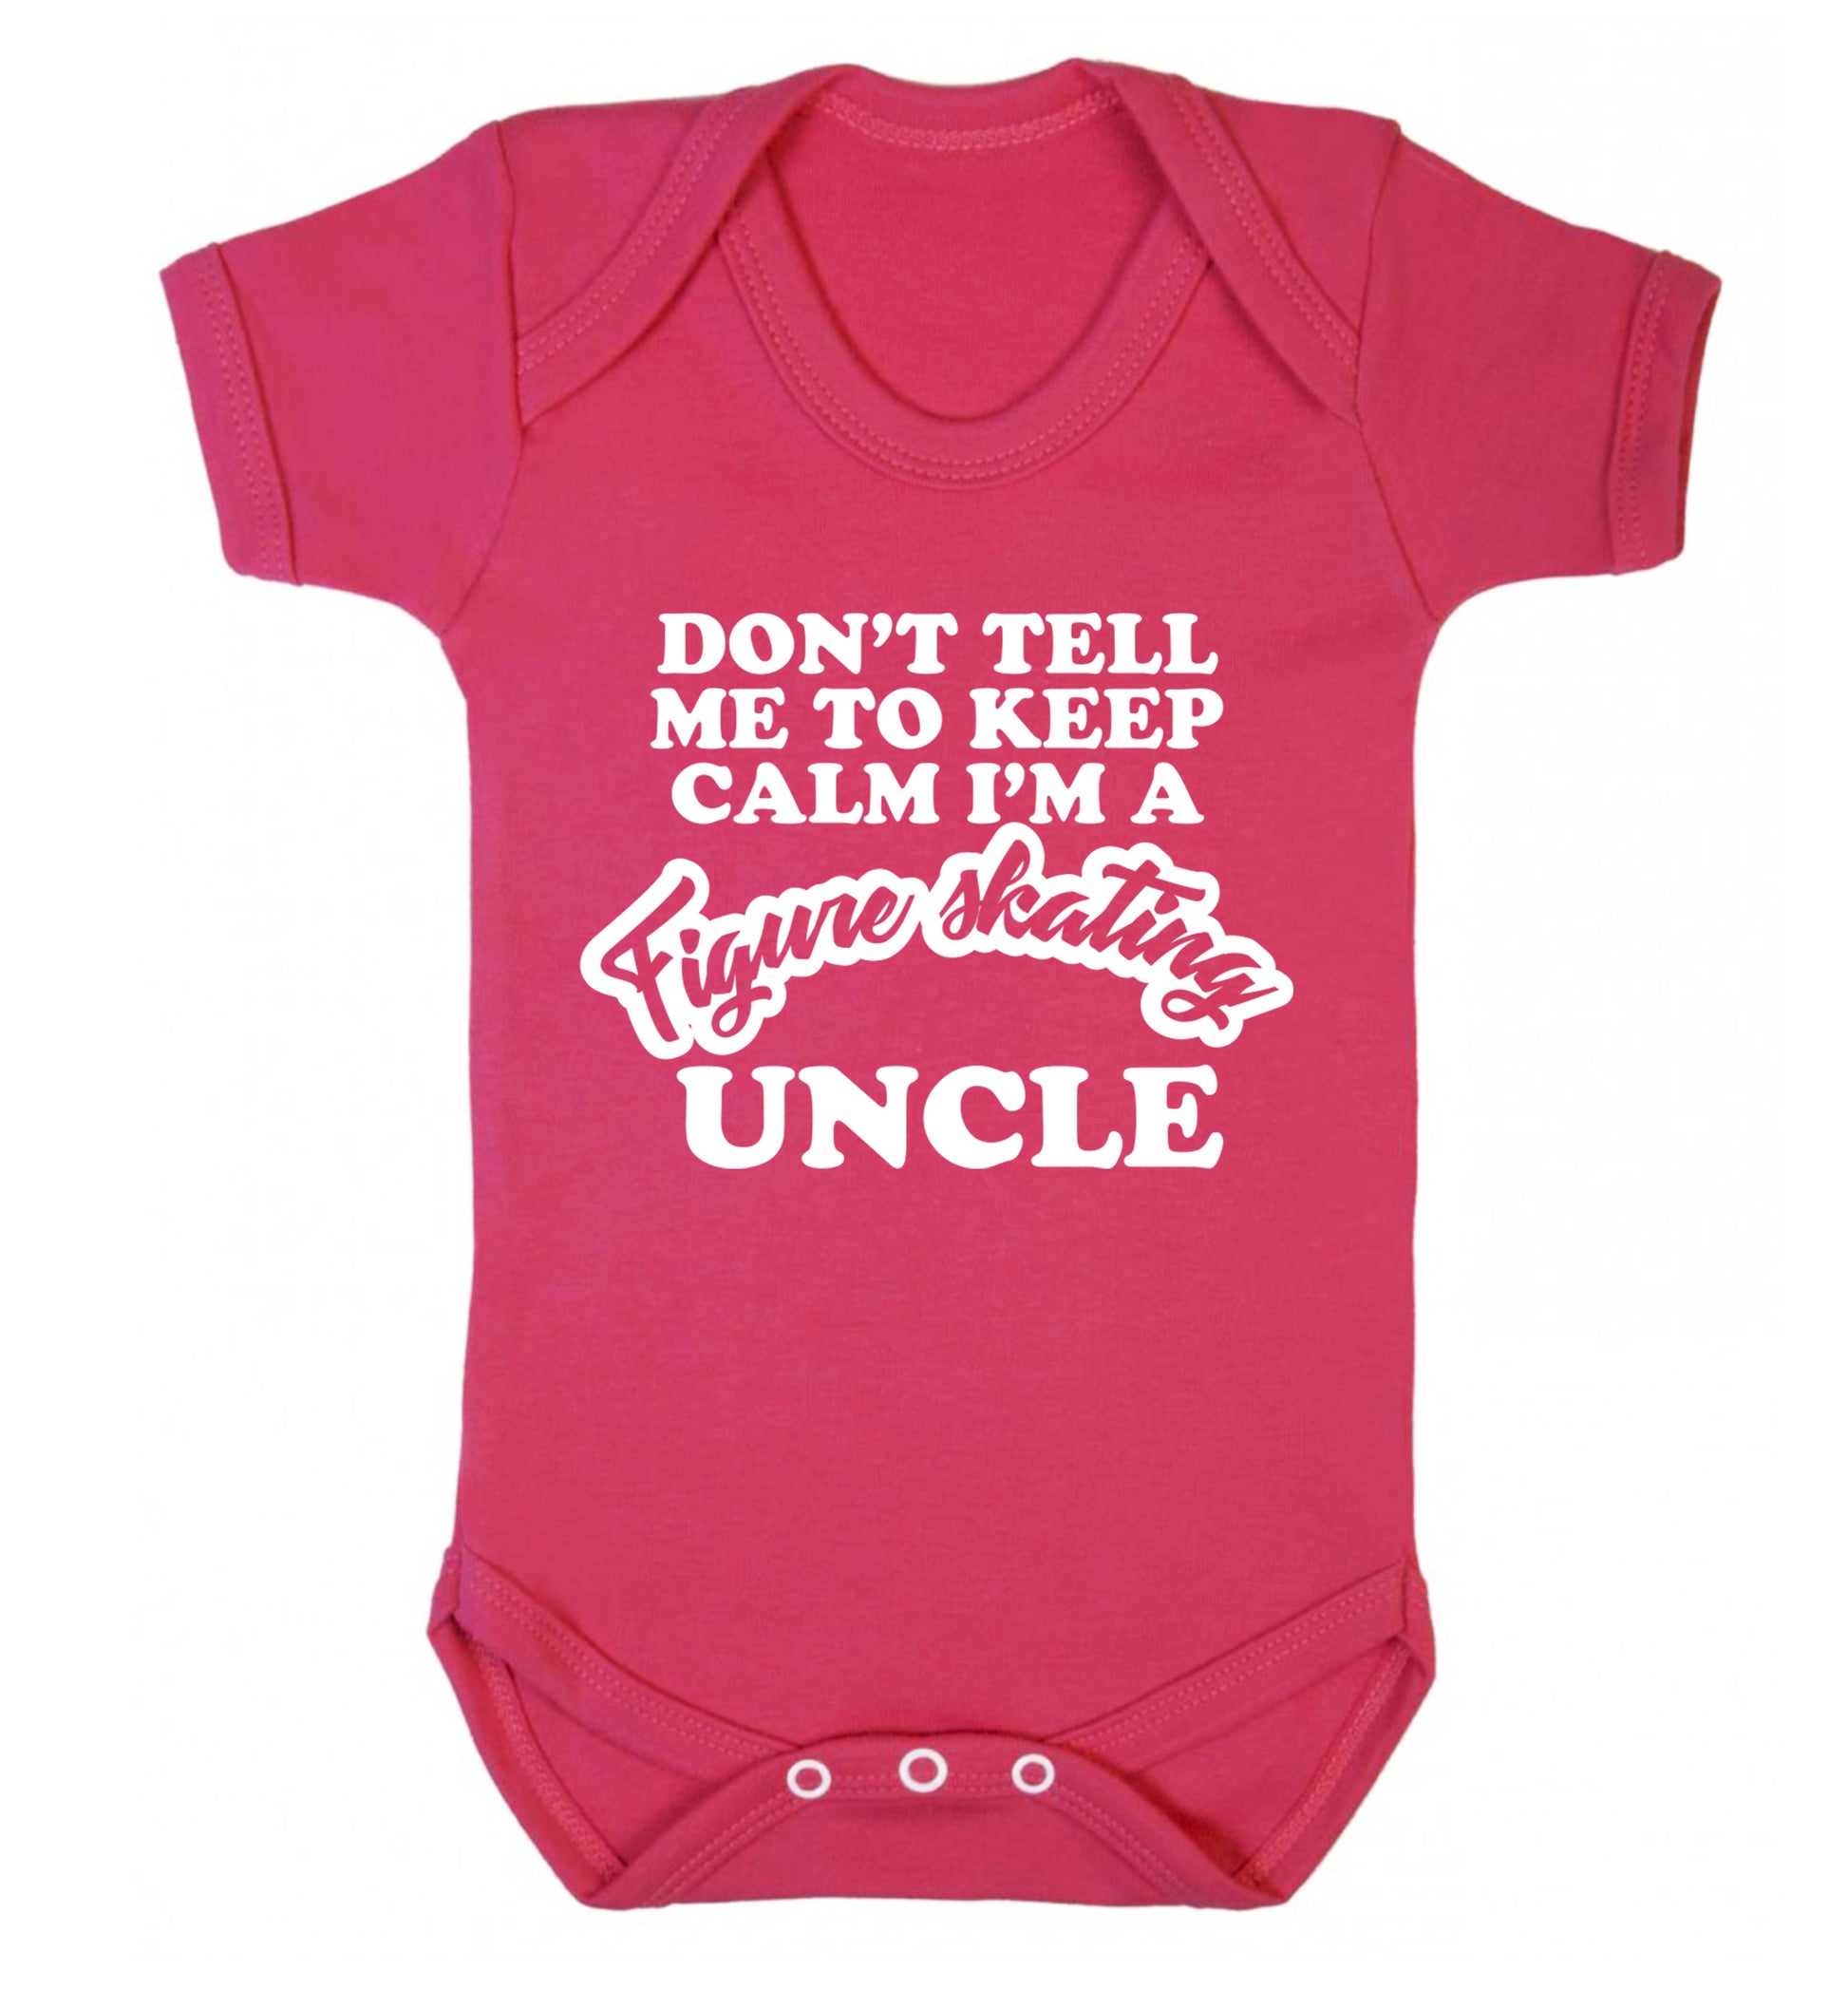 Don't tell me to keep calm I'm a figure skating uncle Baby Vest dark pink 18-24 months